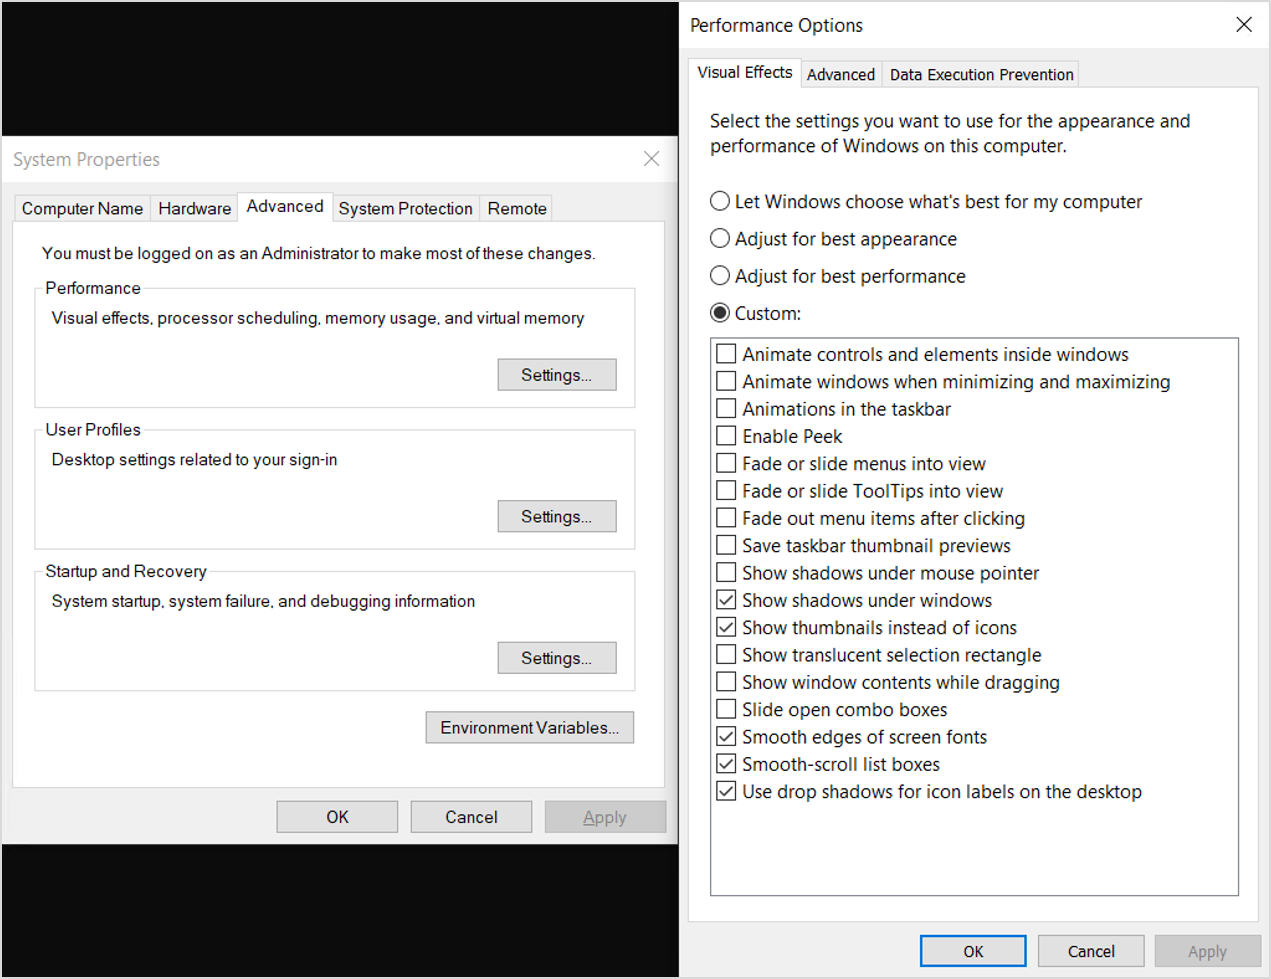 Go to Advanced system settings
Under the Performance section, click on Settings